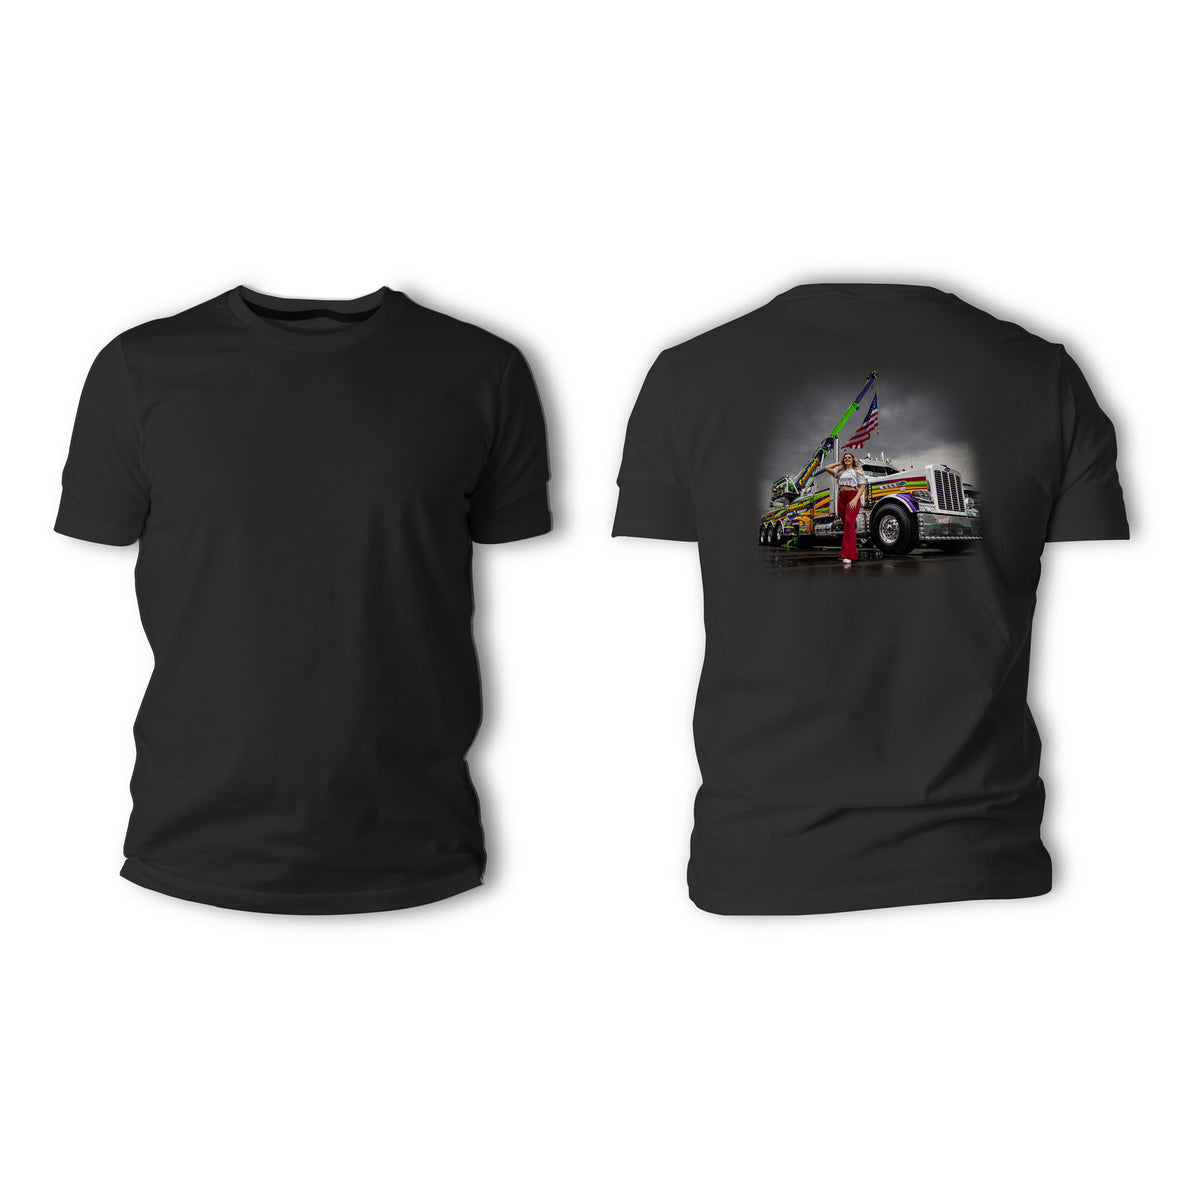 Towing America Shirts and Hoodies